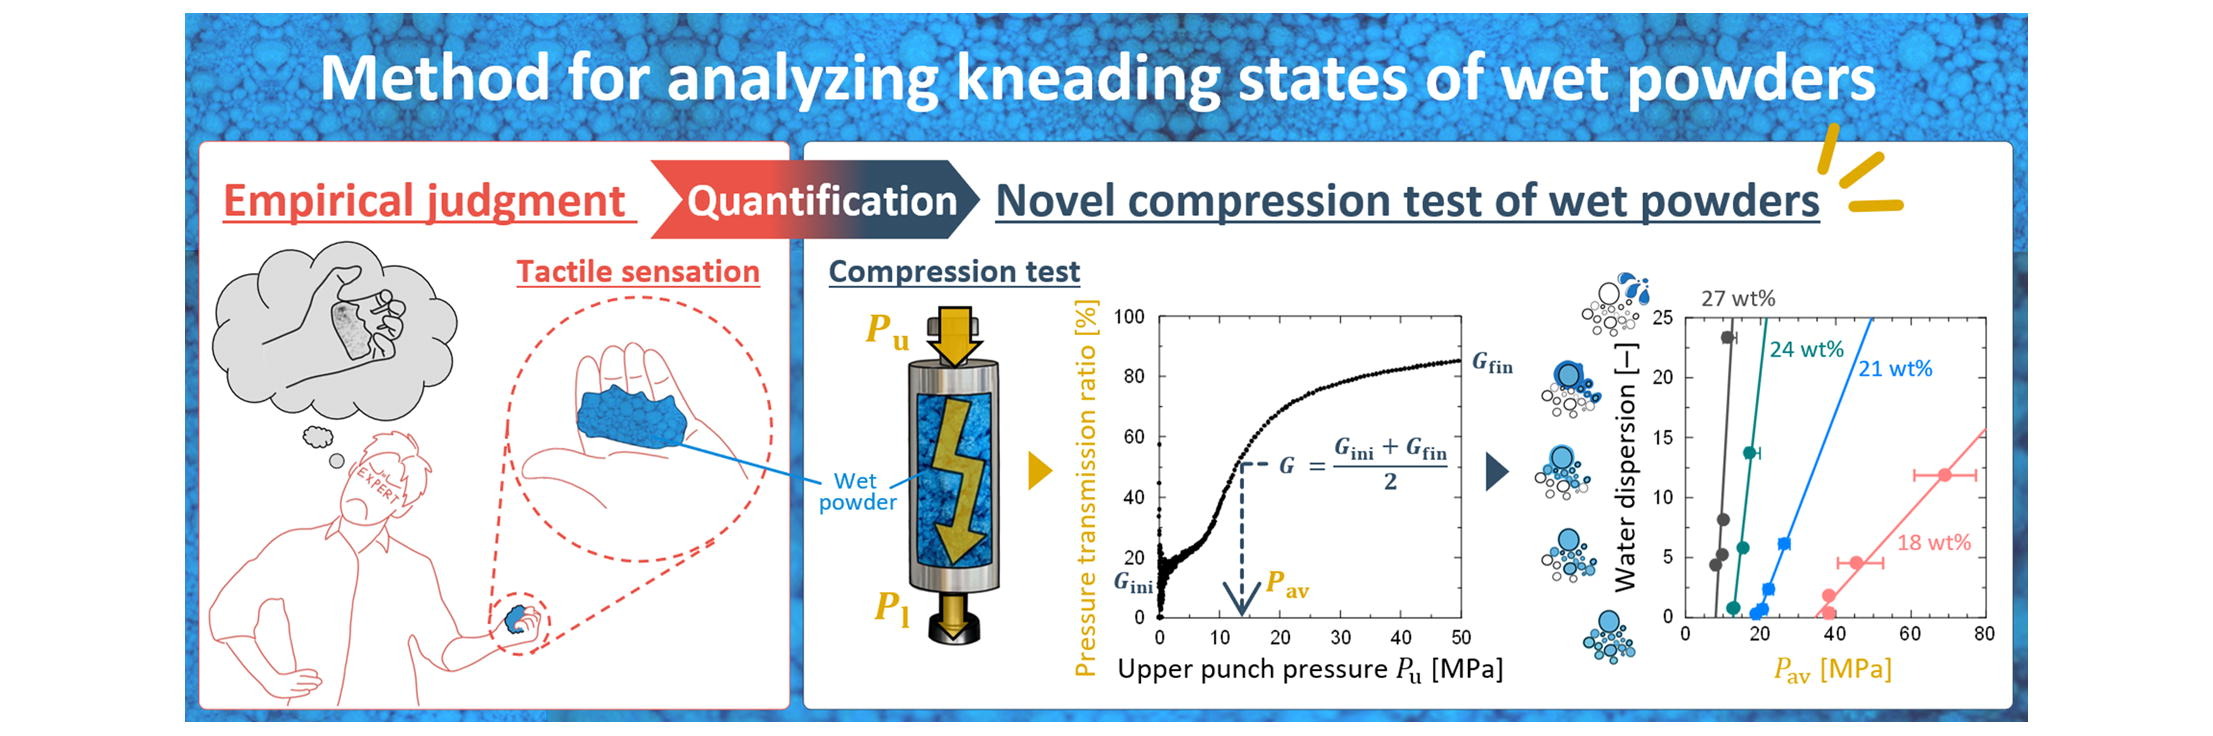 Quantitative analysis of wet kneading states by a novel compression test